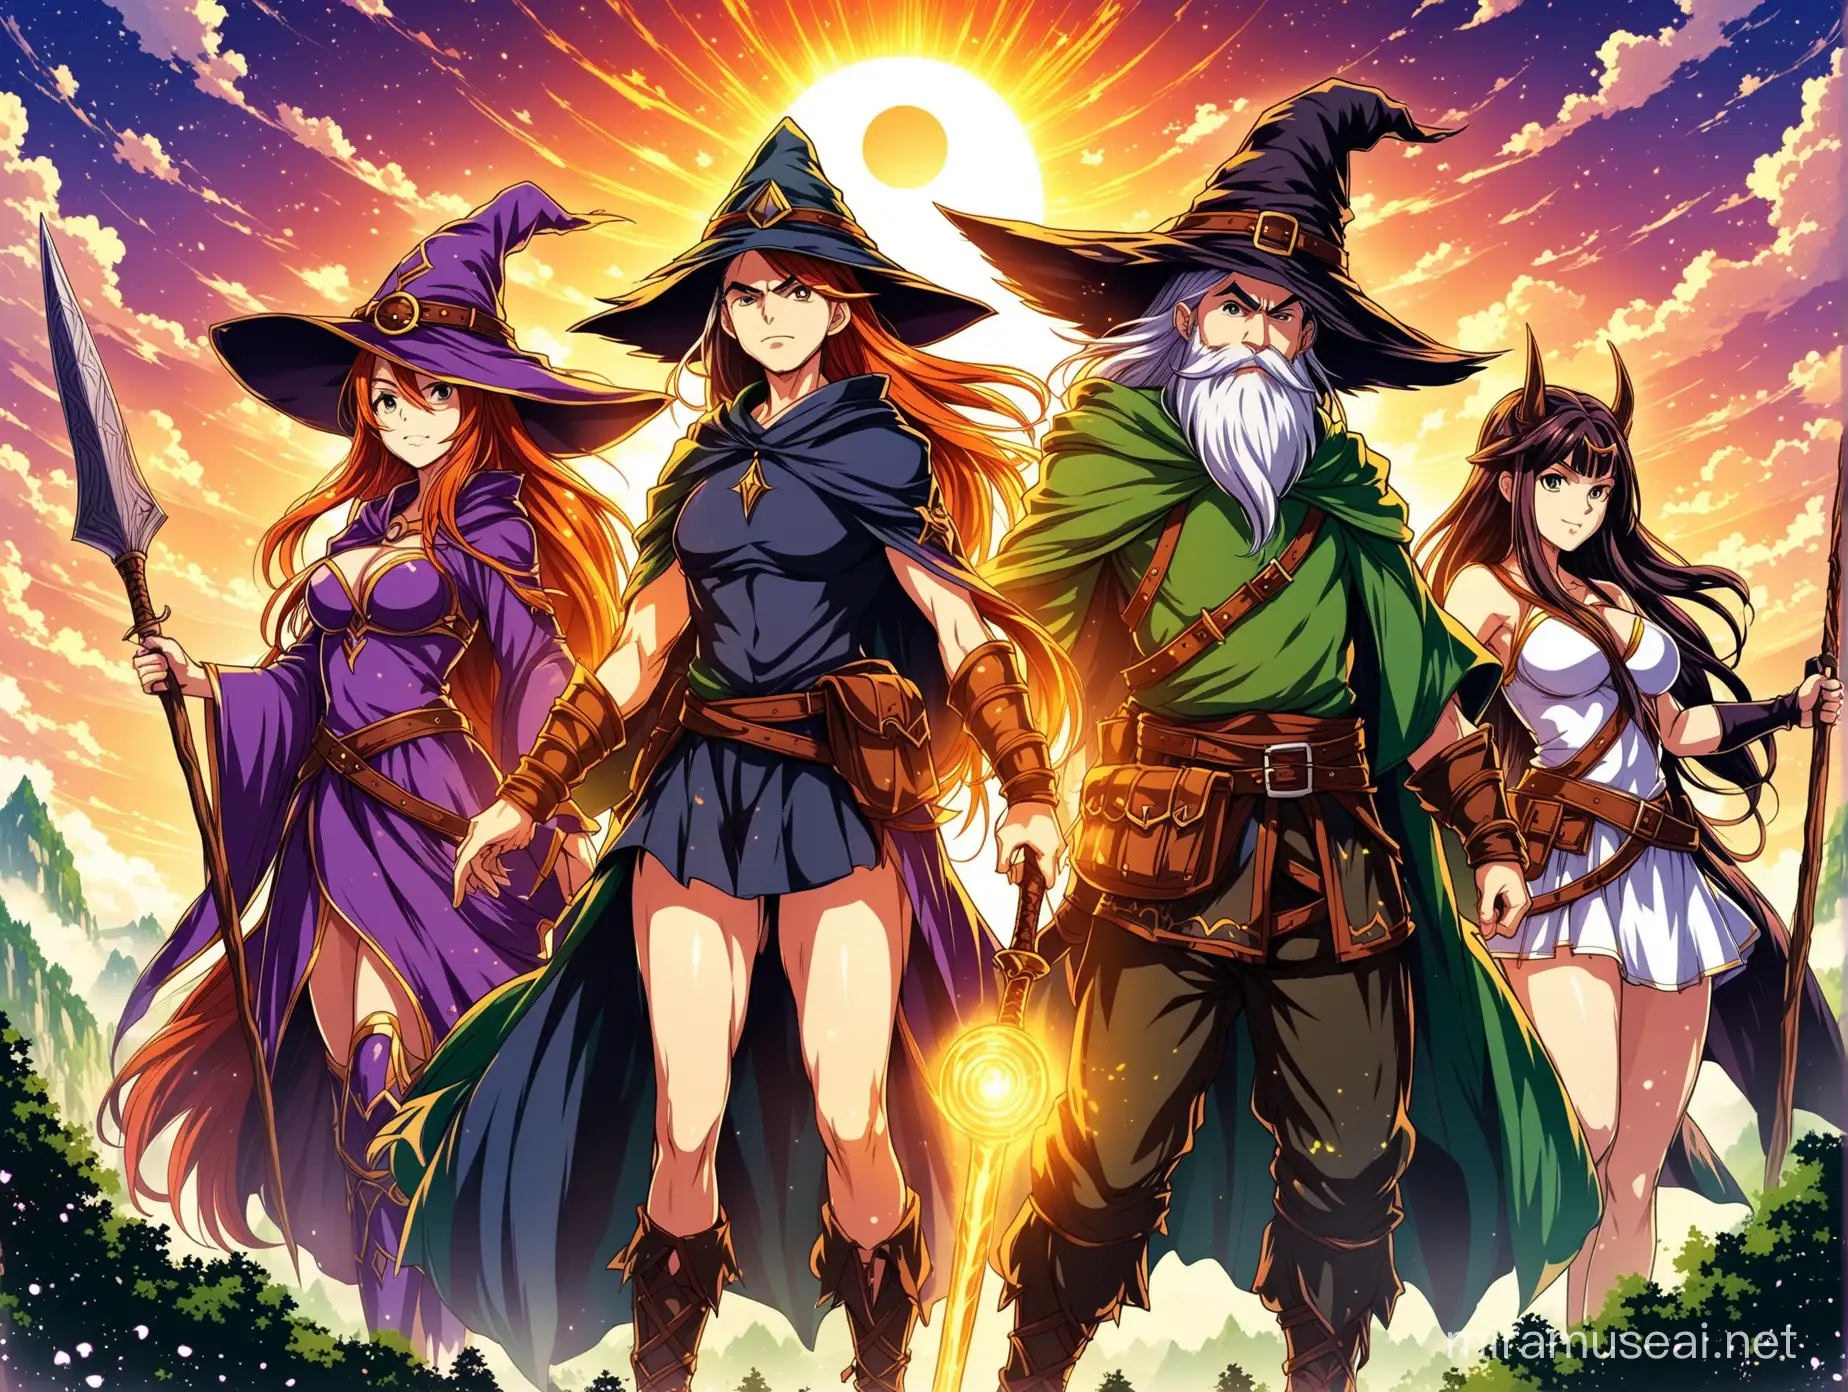 Fantasy Poster. there are a warrior, a wizard, a witch and a druid in anime style